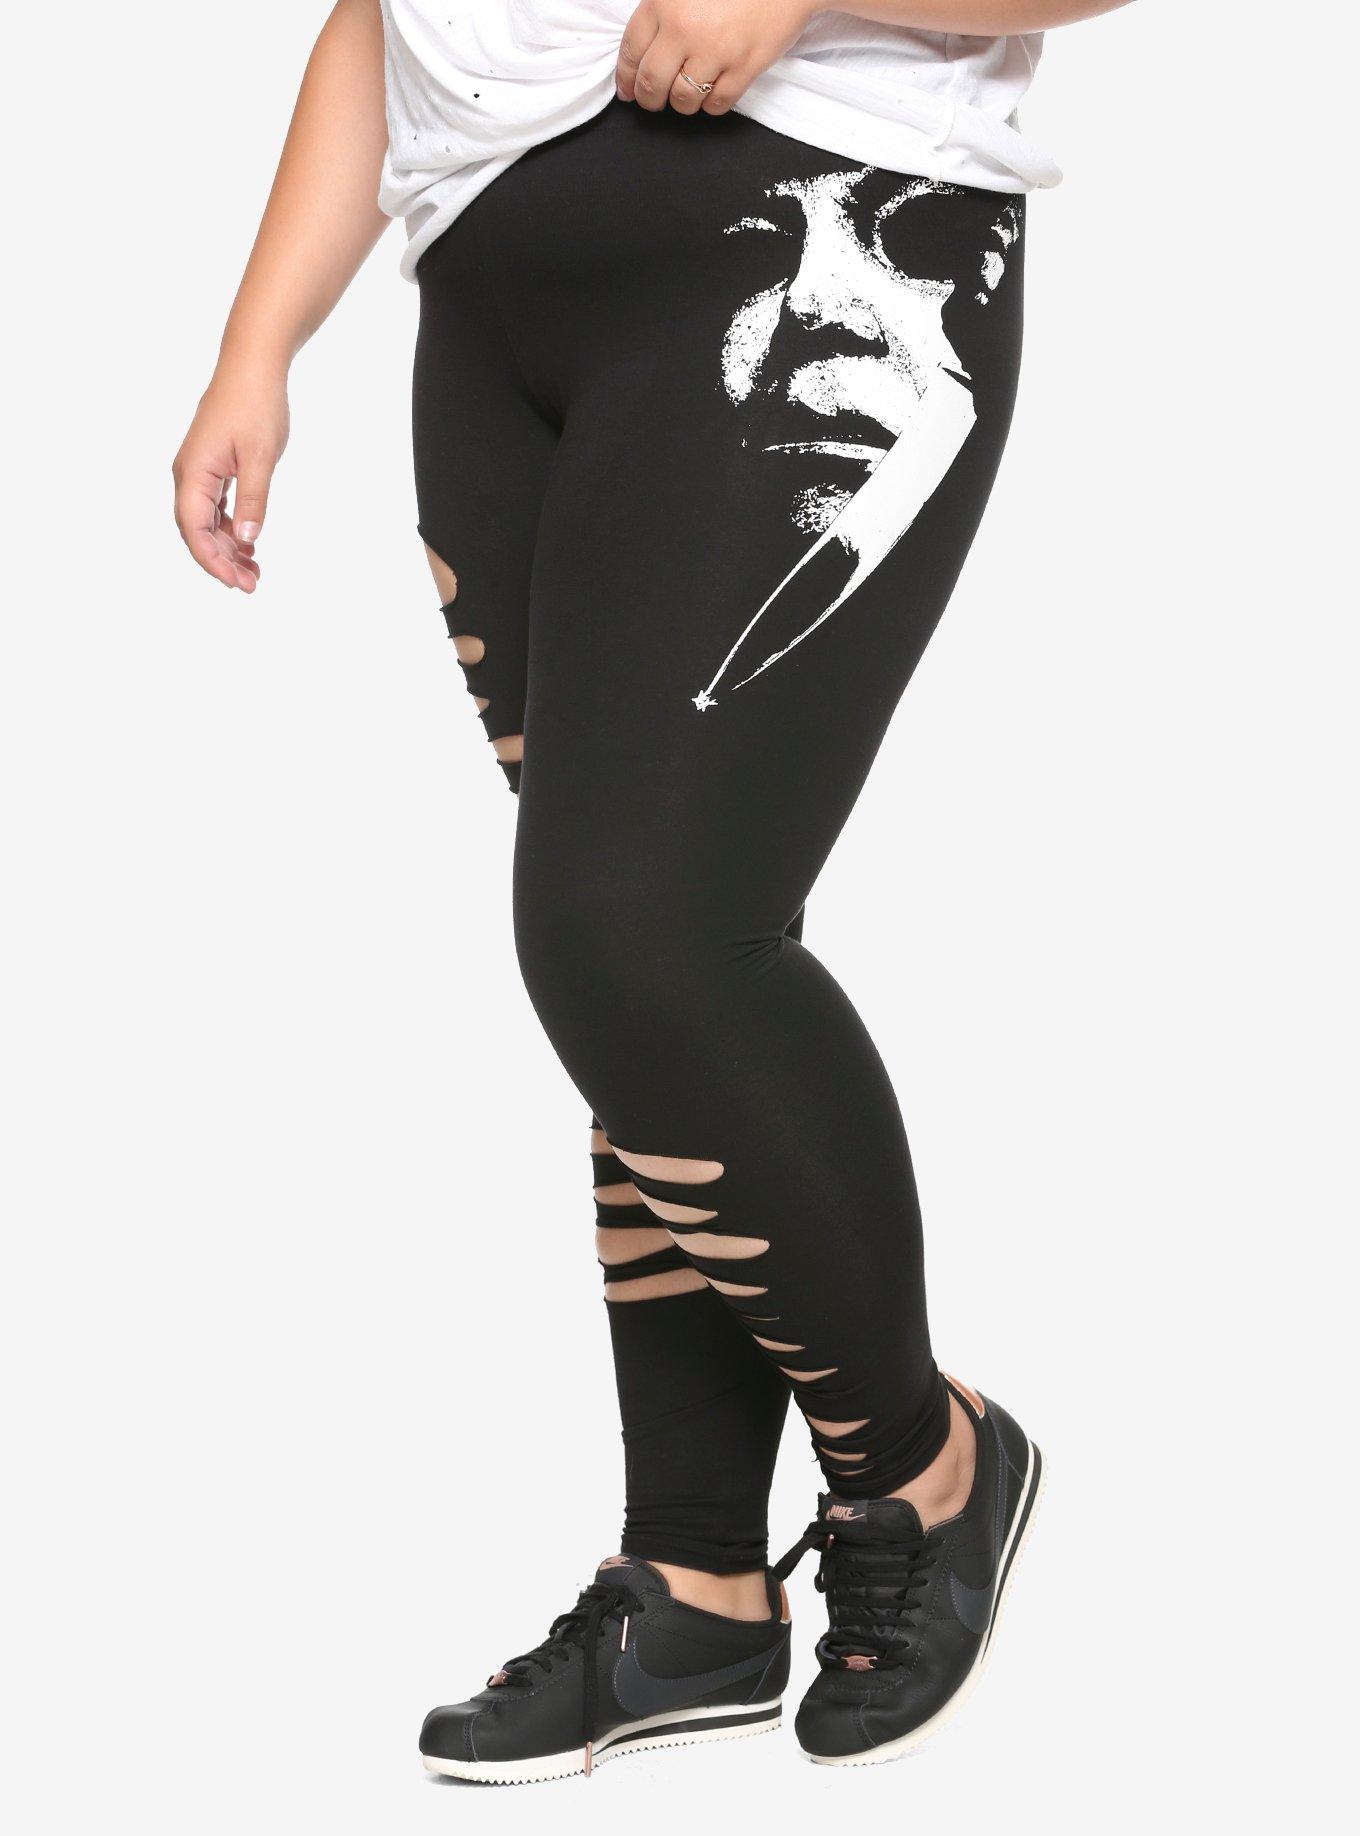 Pirate Booty Plus Size Tights, Halloween Leggings